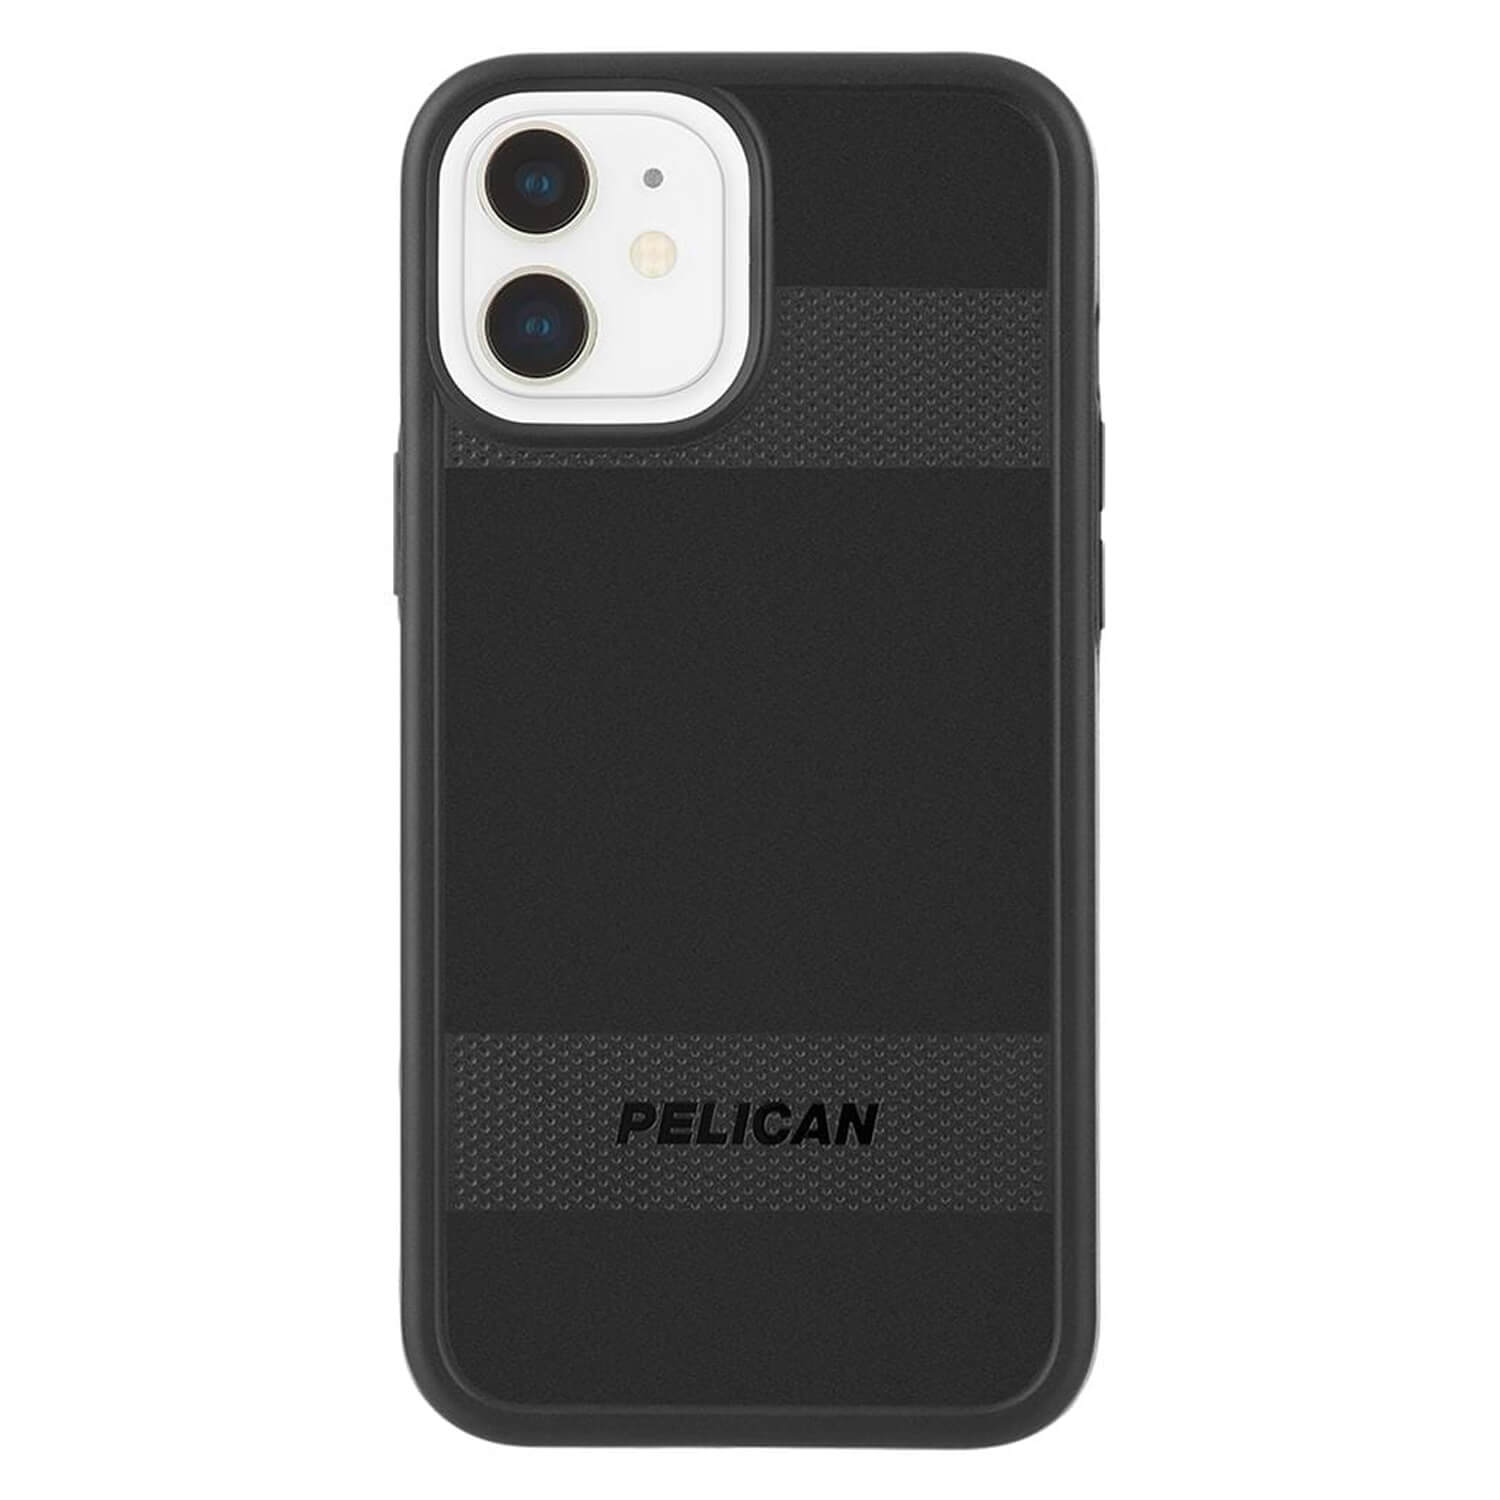 Pelican iPhone 13 Case Protector Antimicrobial Black